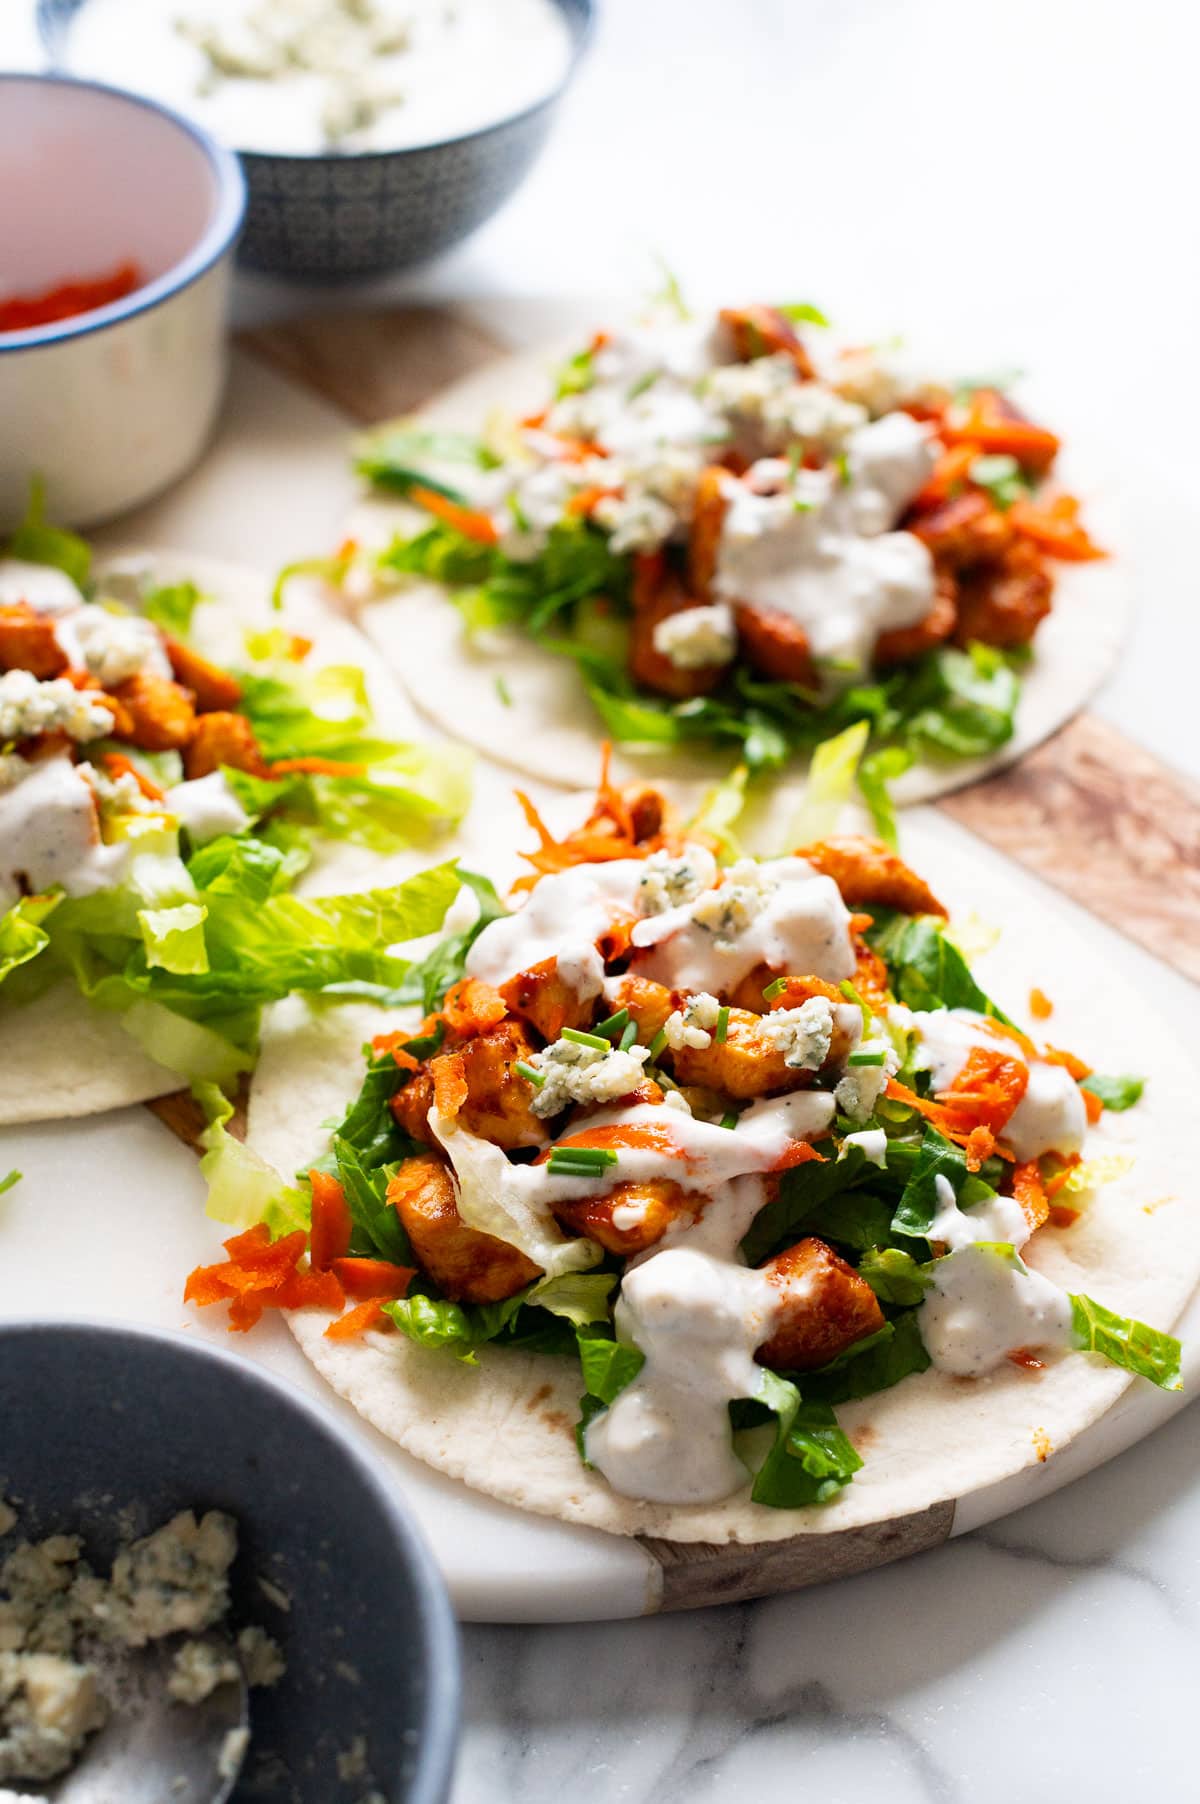 Buffalo chicken tacos with blue sauce, carrots and lettuce.